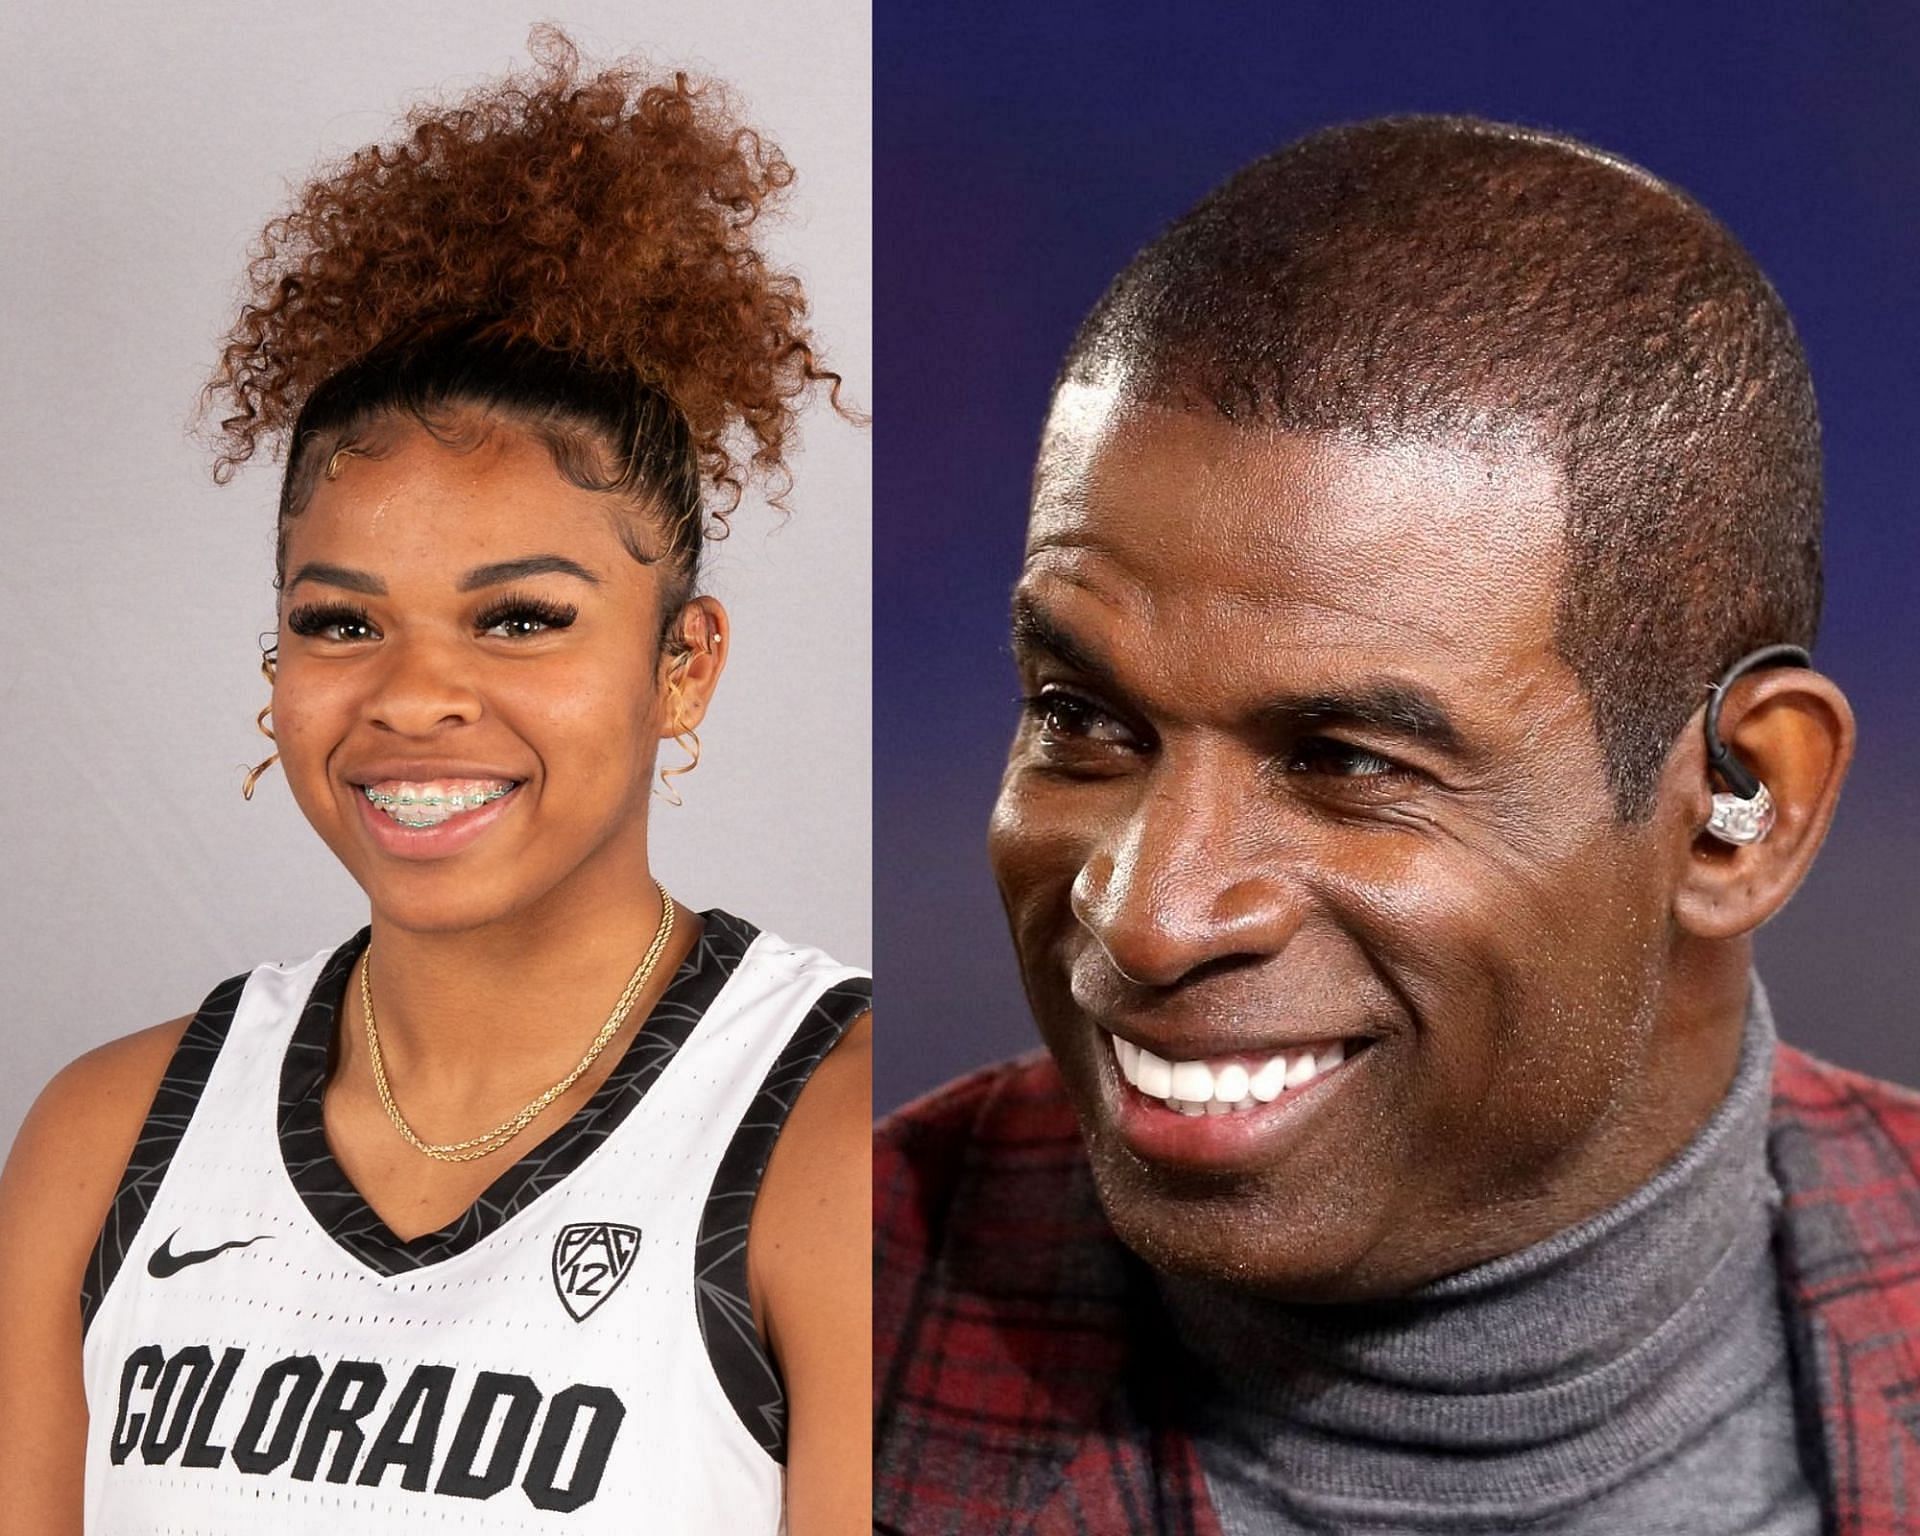 Shelomi Sanders and her father Deion Sanders